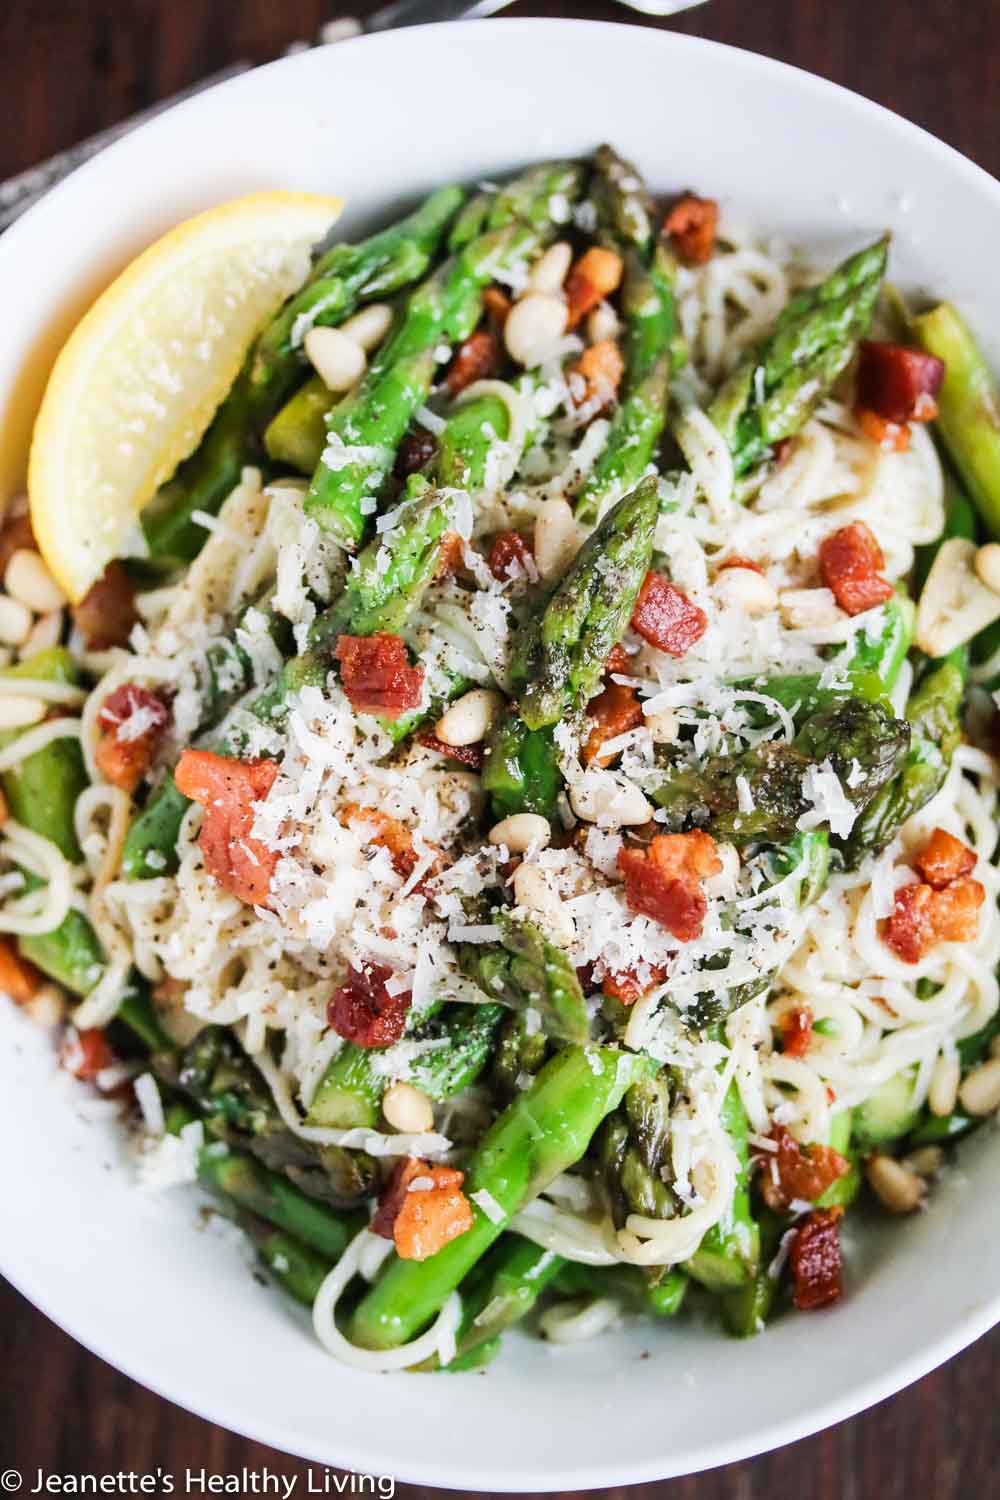 Pasta with Asparagus Pancetta and Pine Nuts - this gluten-free, low-carb pasta dish takes just 15 minutes to make - so simple and delicious!